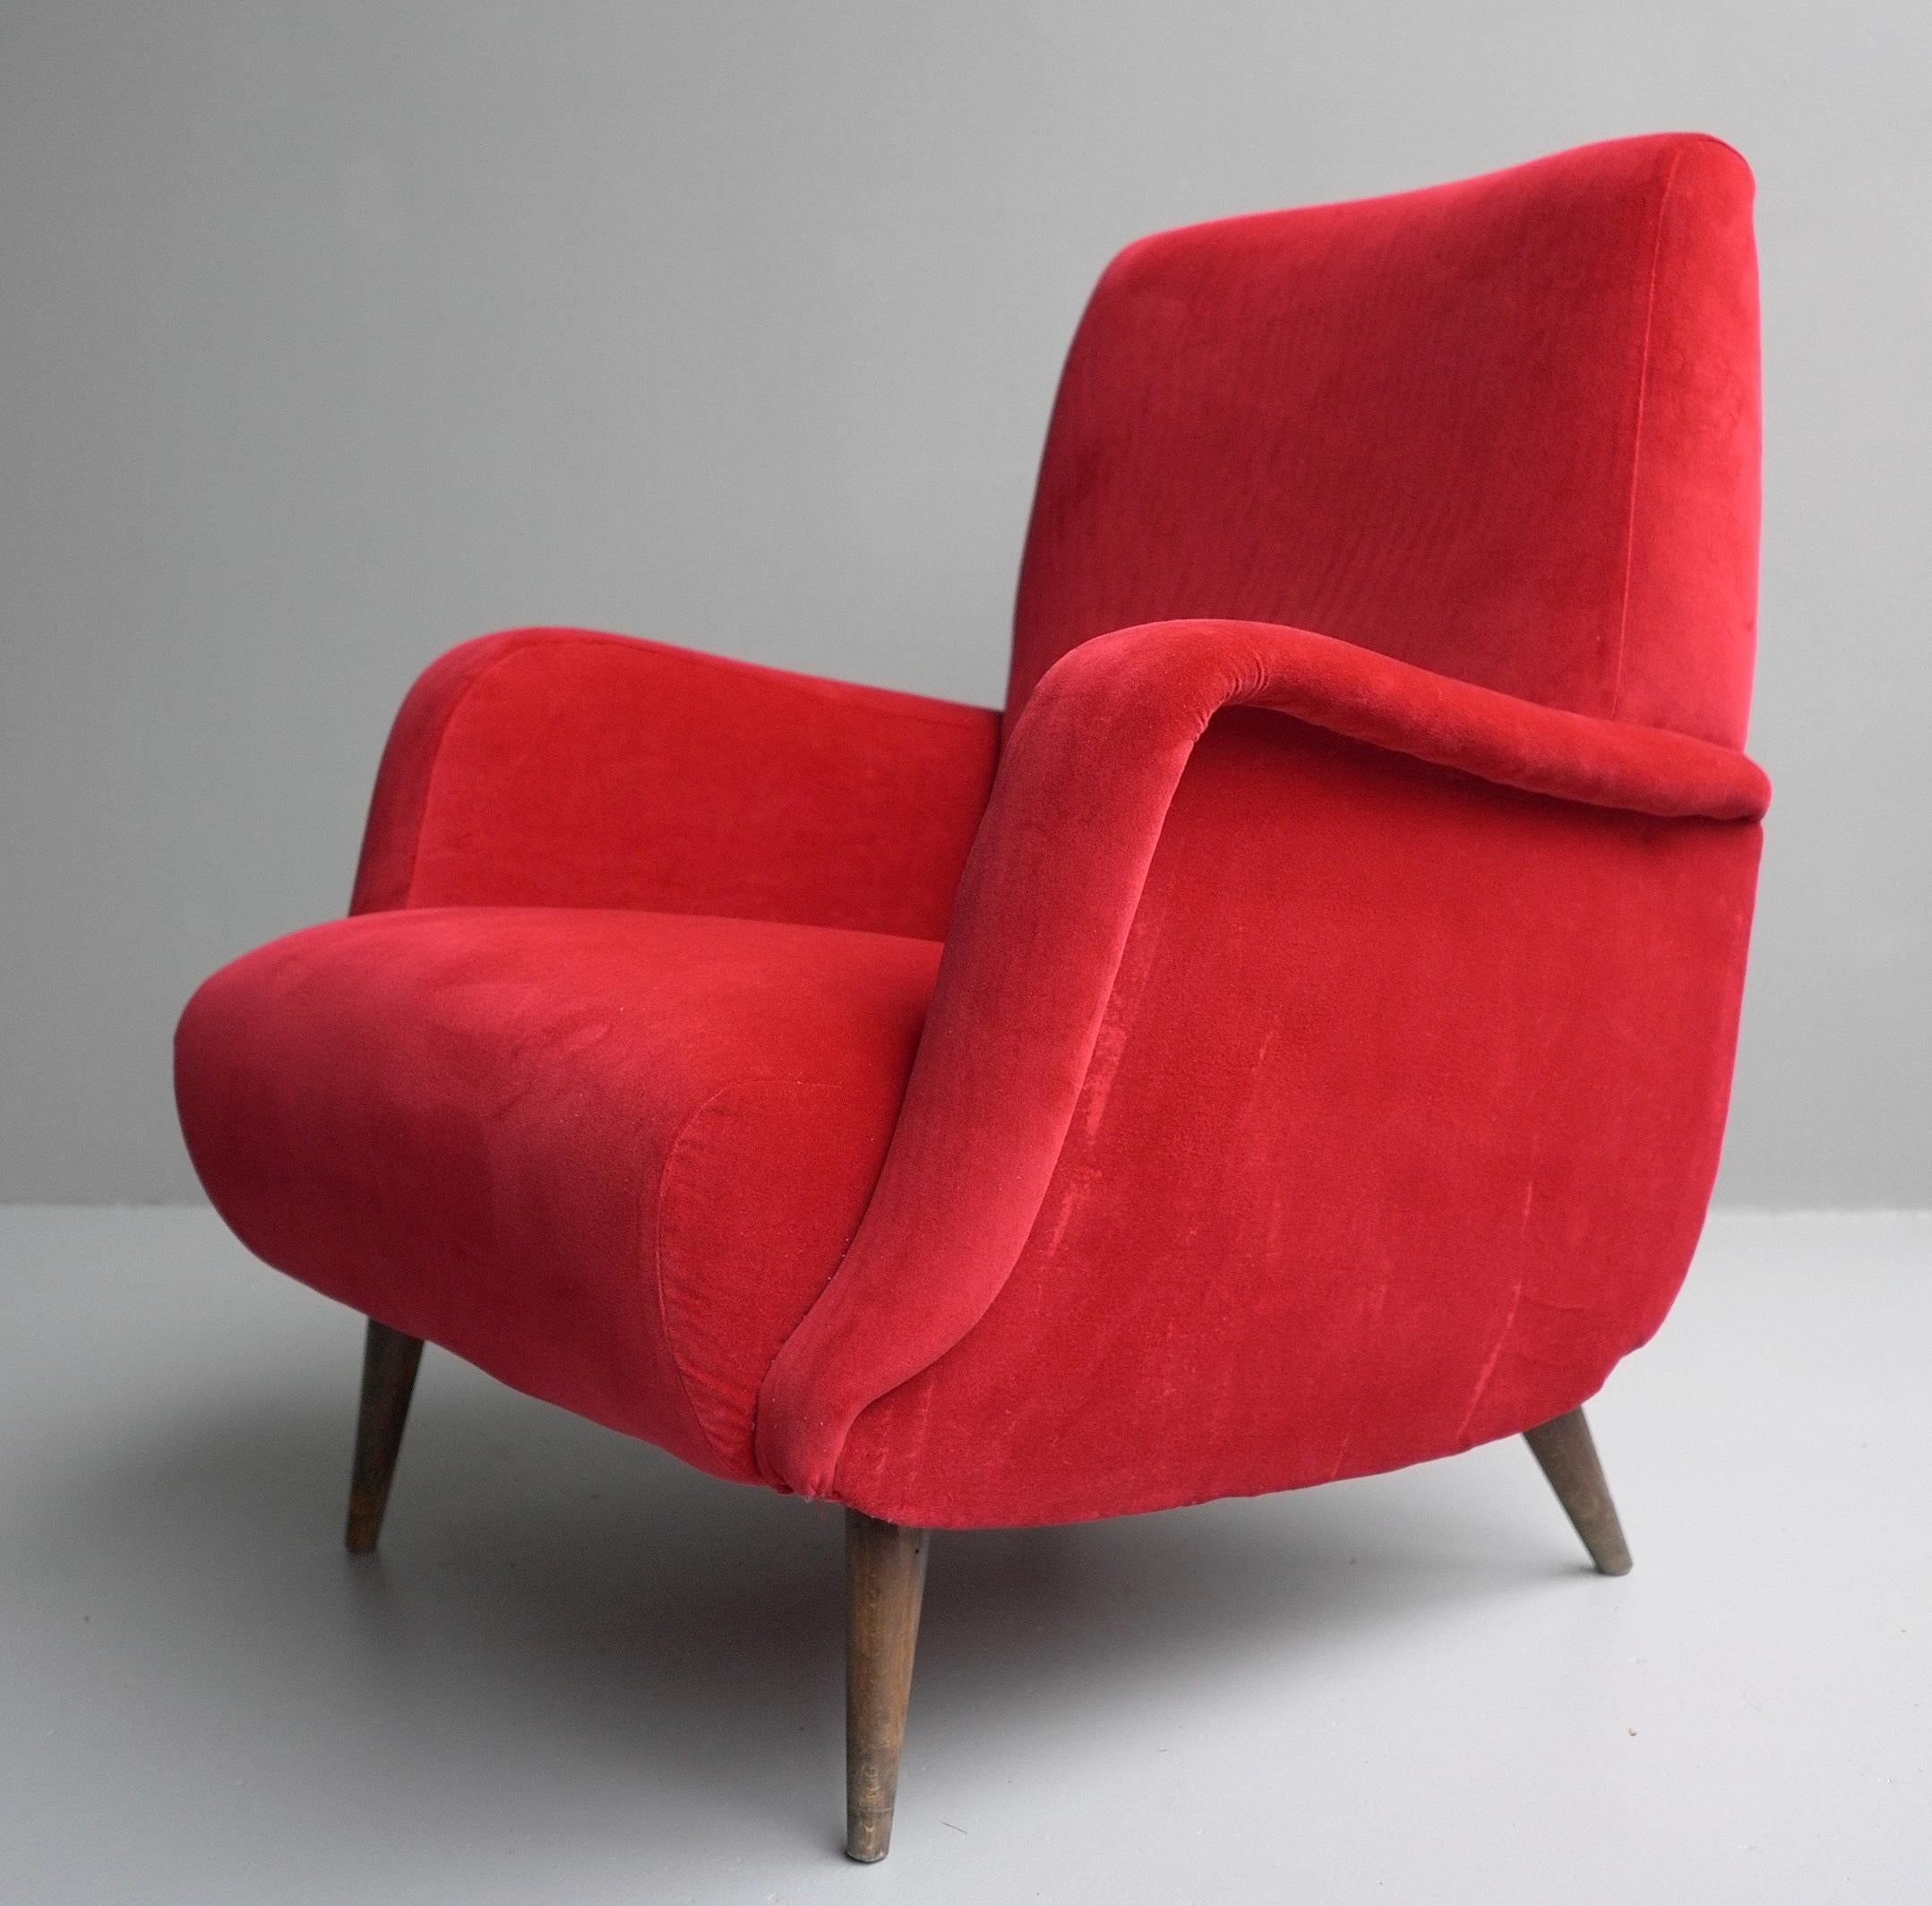 Carlo de Carli Red velvet and Walnut Armchair Model 806 by Cassina, Italy, 1955 For Sale 3